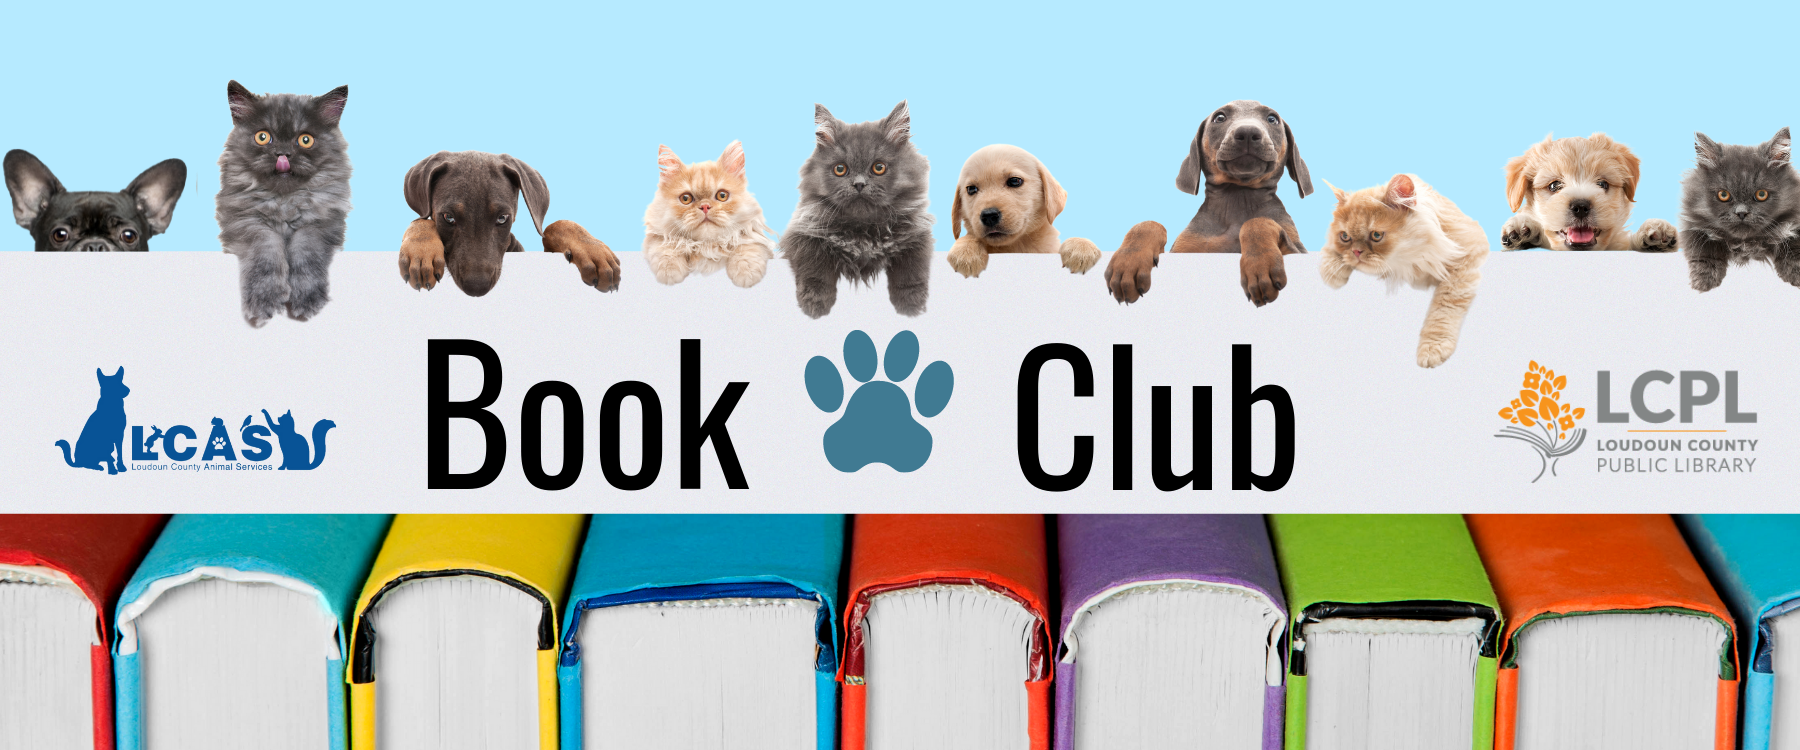 Image of multiple animals to promote Loudoun County Animal Services Book Club